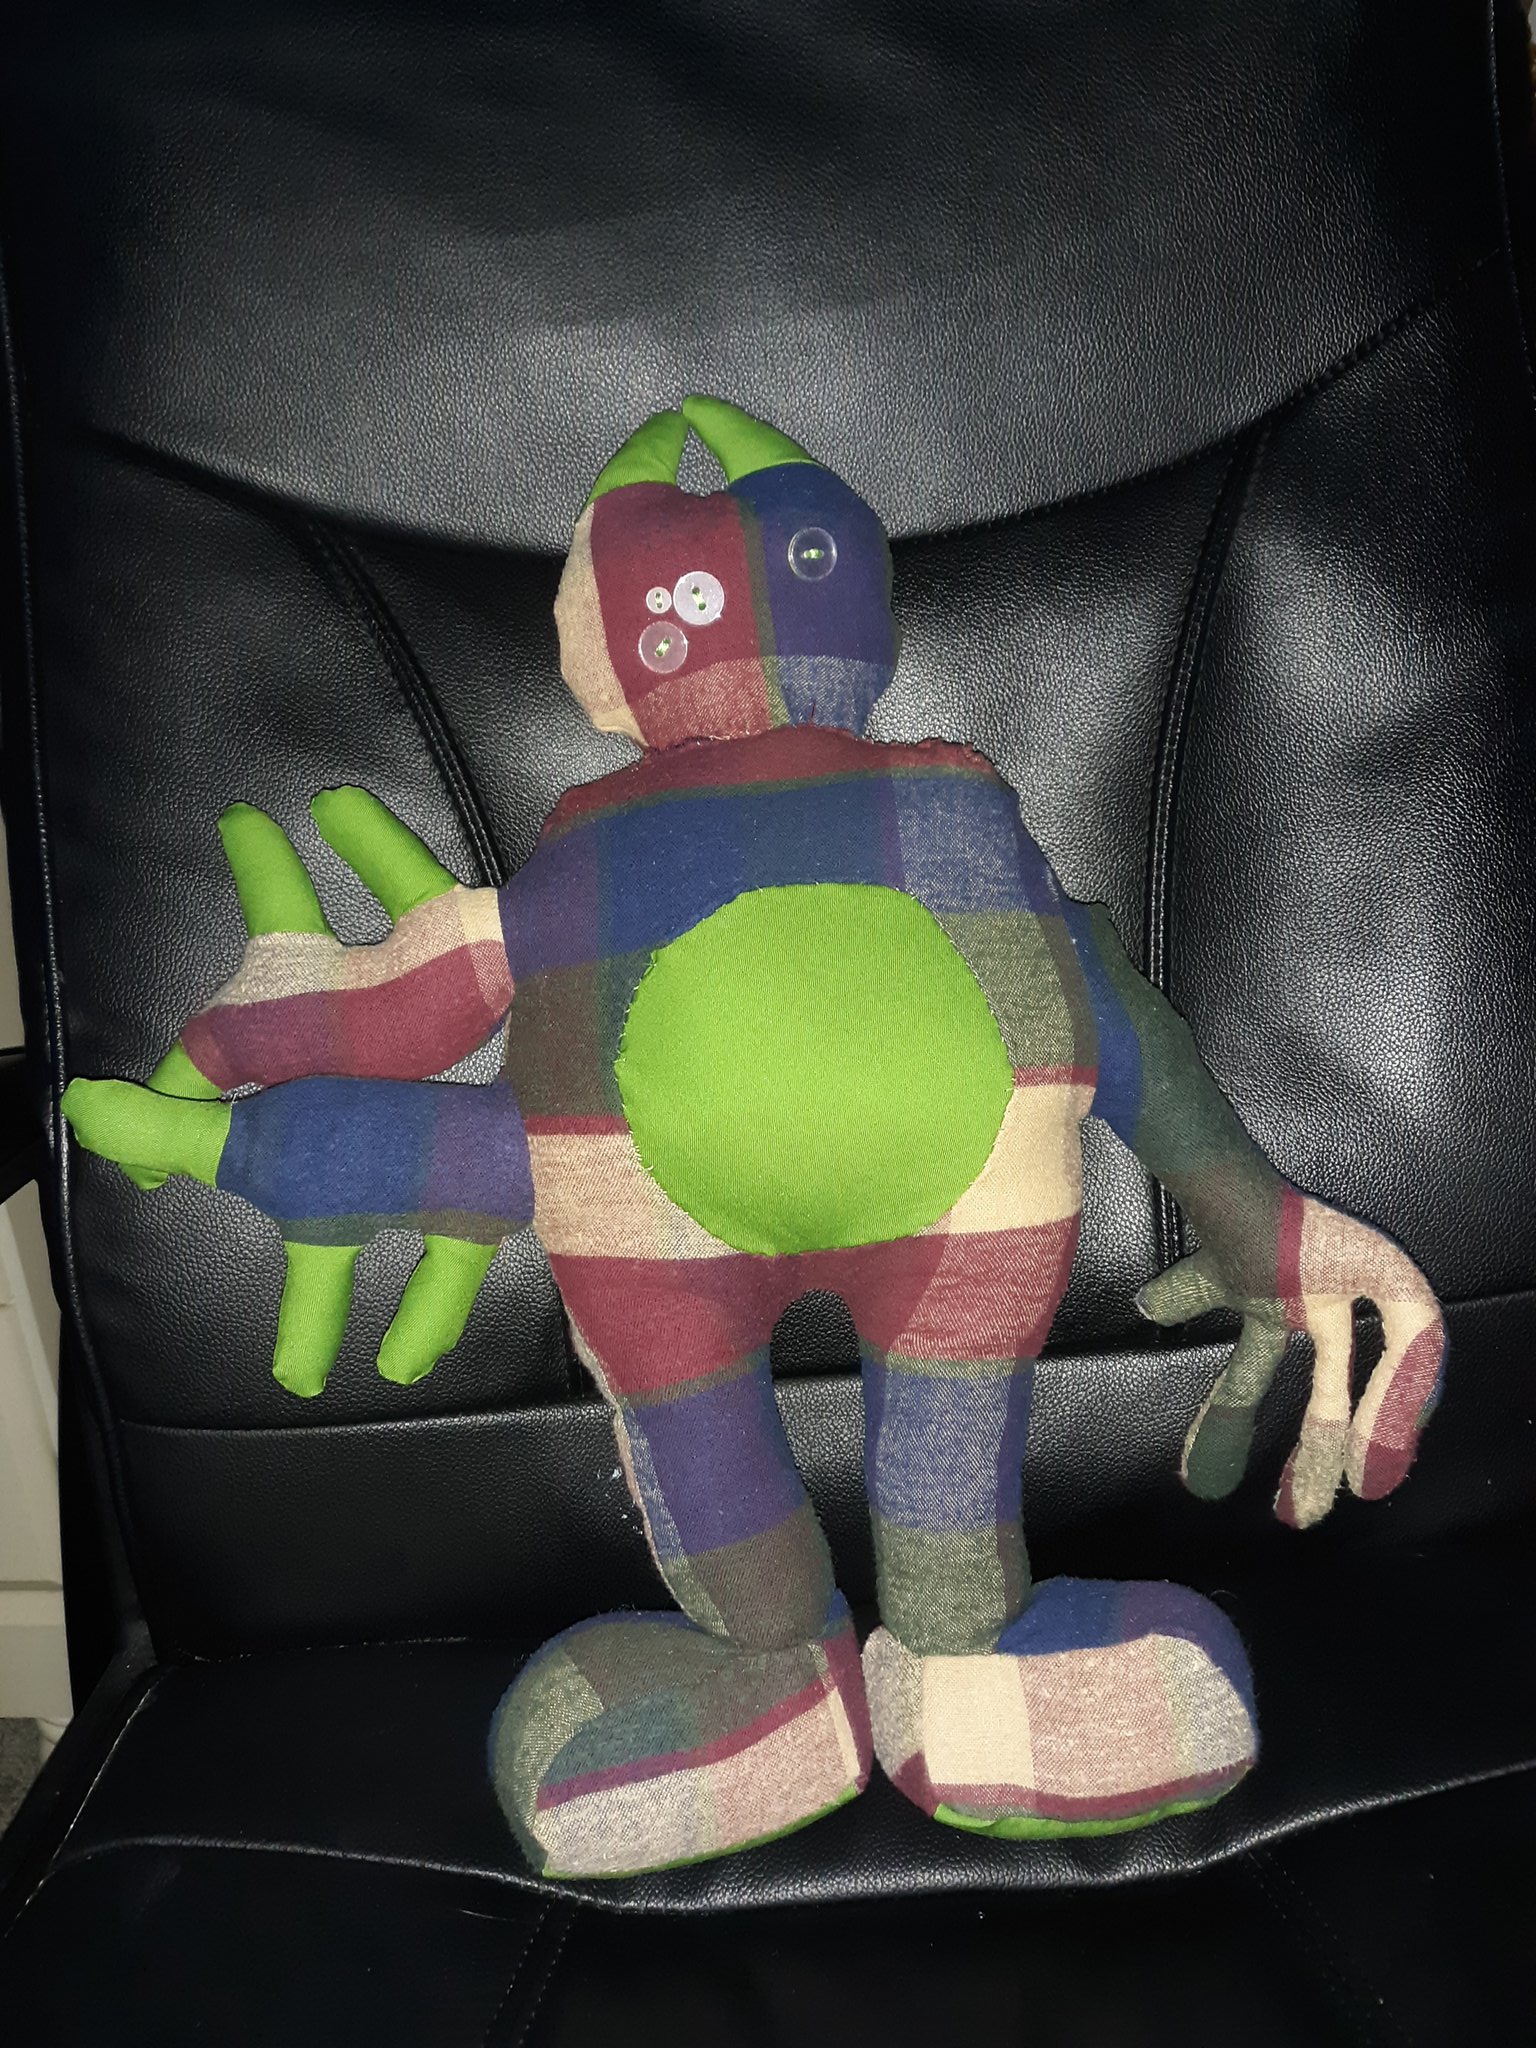 A green and plaid doll sitting on a black chair. The doll has a small plaid round head with two green horns coming out of it. It has four eyes made of clear buttons. The right side of their head only has one button and the left side has three buttons. The doll has a large body made of the same plaid material. It has a round green belly. They have two arms sticking out of the left side of their body. Each arm has three green fingers like eyes on a potato. The right side of their body only has one arm that has four fingers on it. They have two legs with rectangular feet.